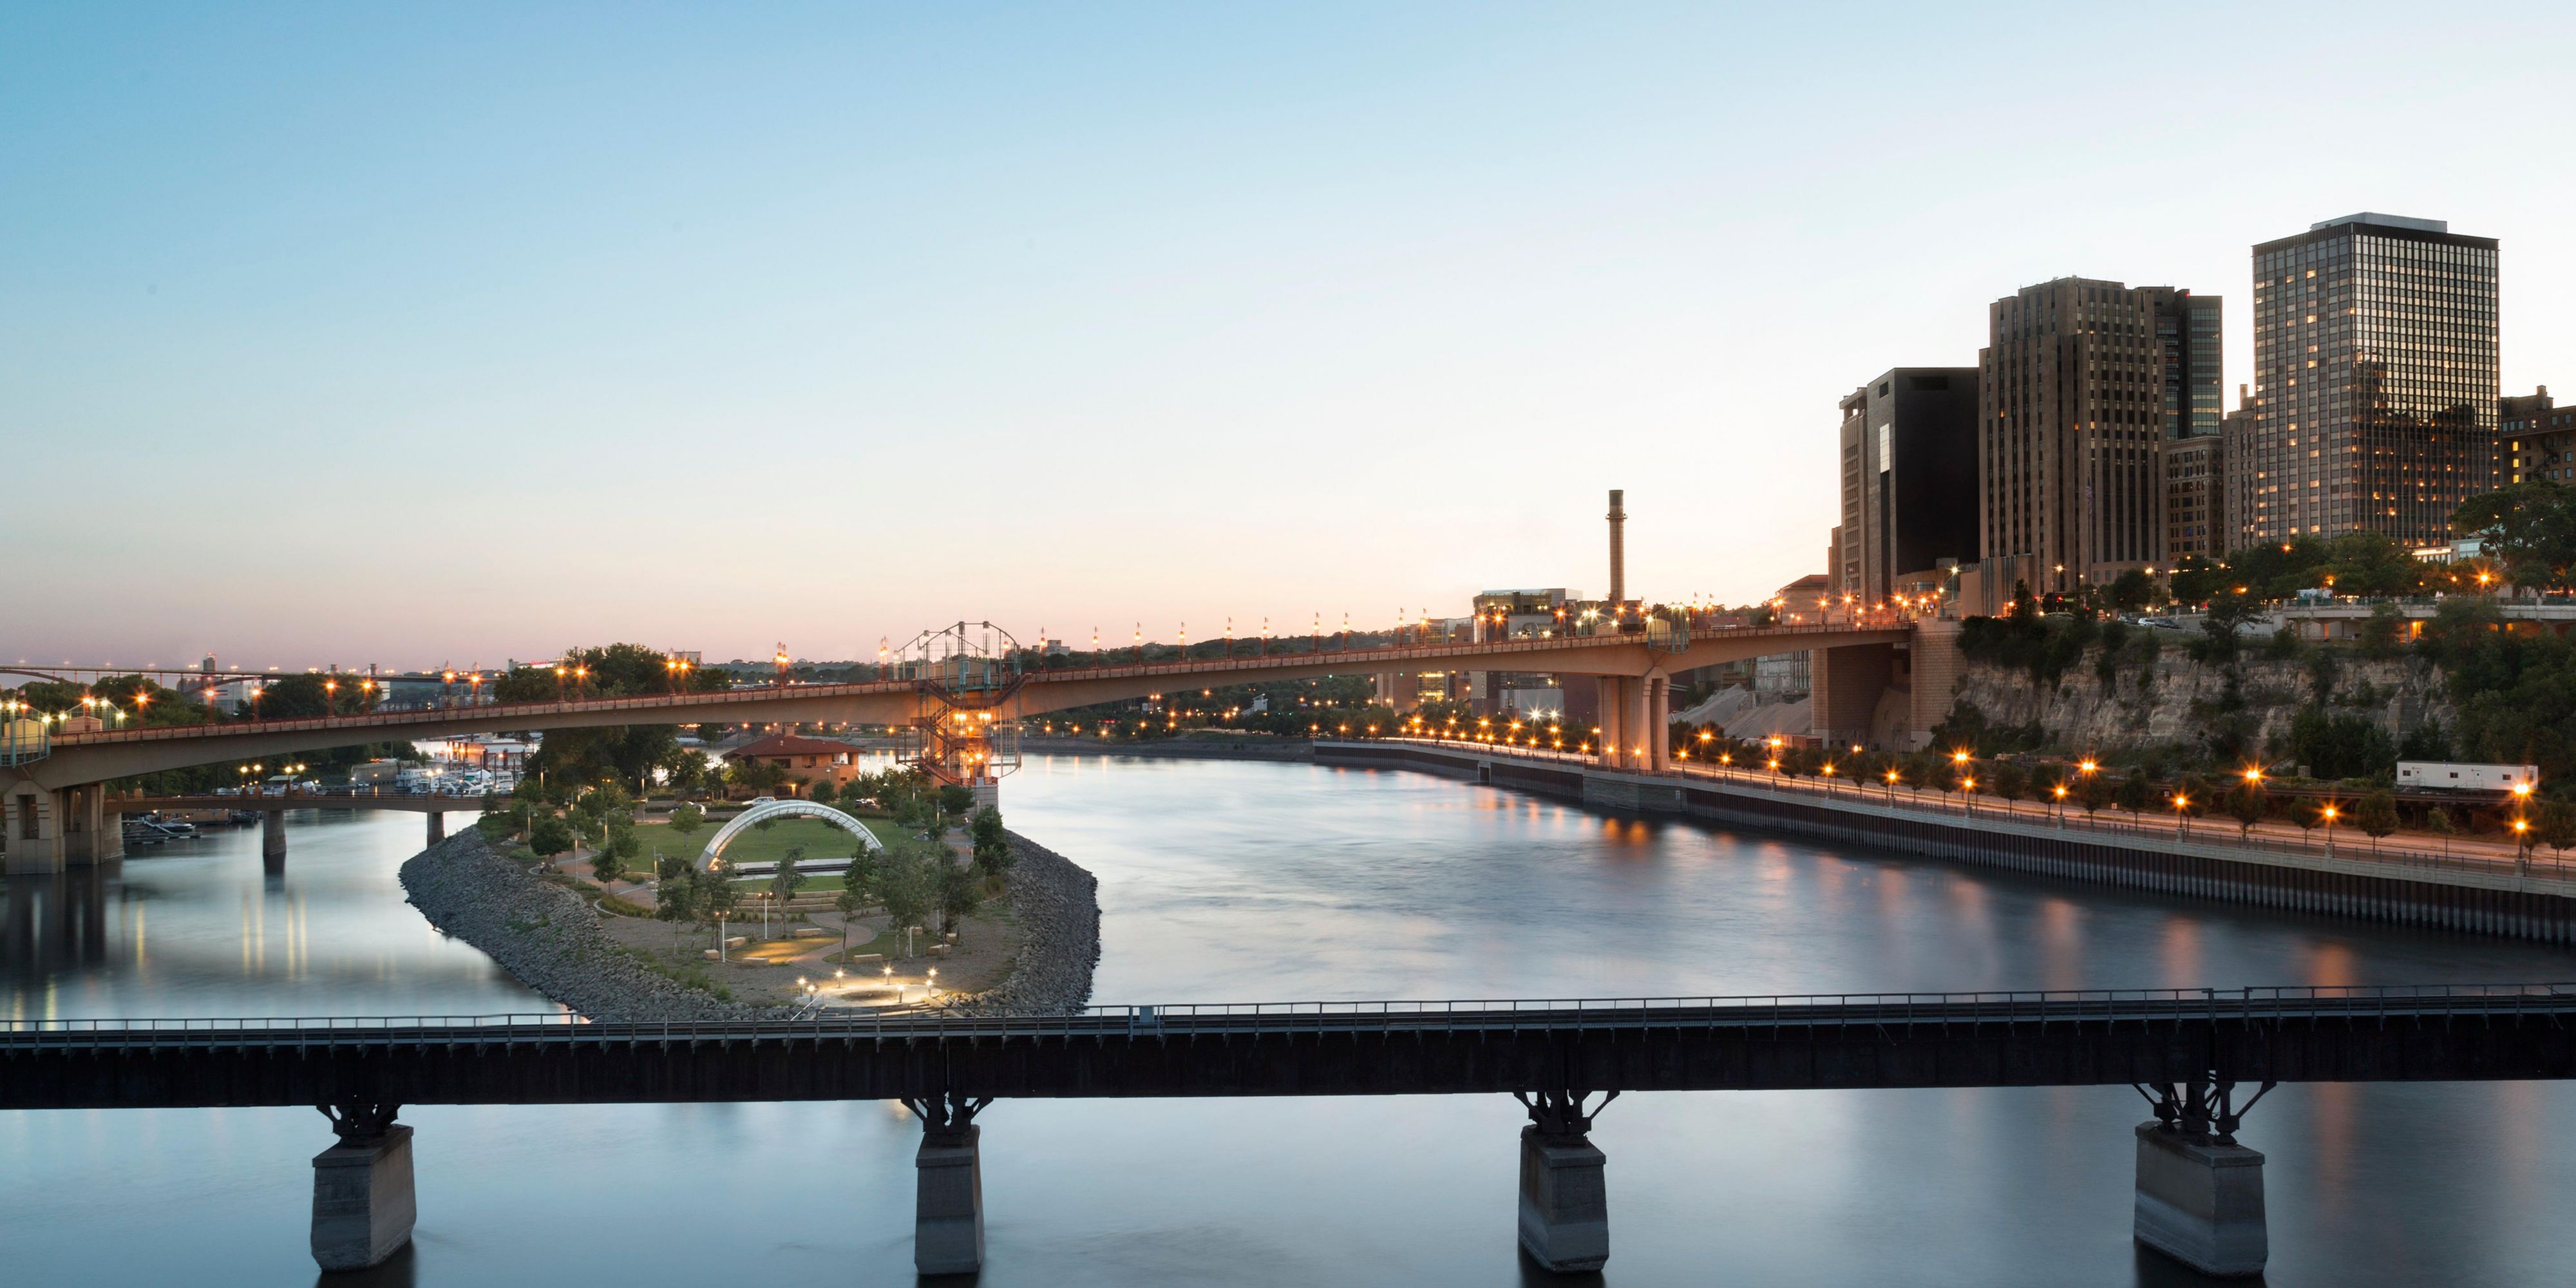 Our hotel's riverfront location in downtown St. Paul offers breathtaking views of the Mississippi River and effortless access to the Twin Cities. Discover Saint Paul's famous attractions such as the Science Museum of Minnesota, History Center, Children’s Museum, CHS Field, Allianz Field, and the Xcel Energy Center.